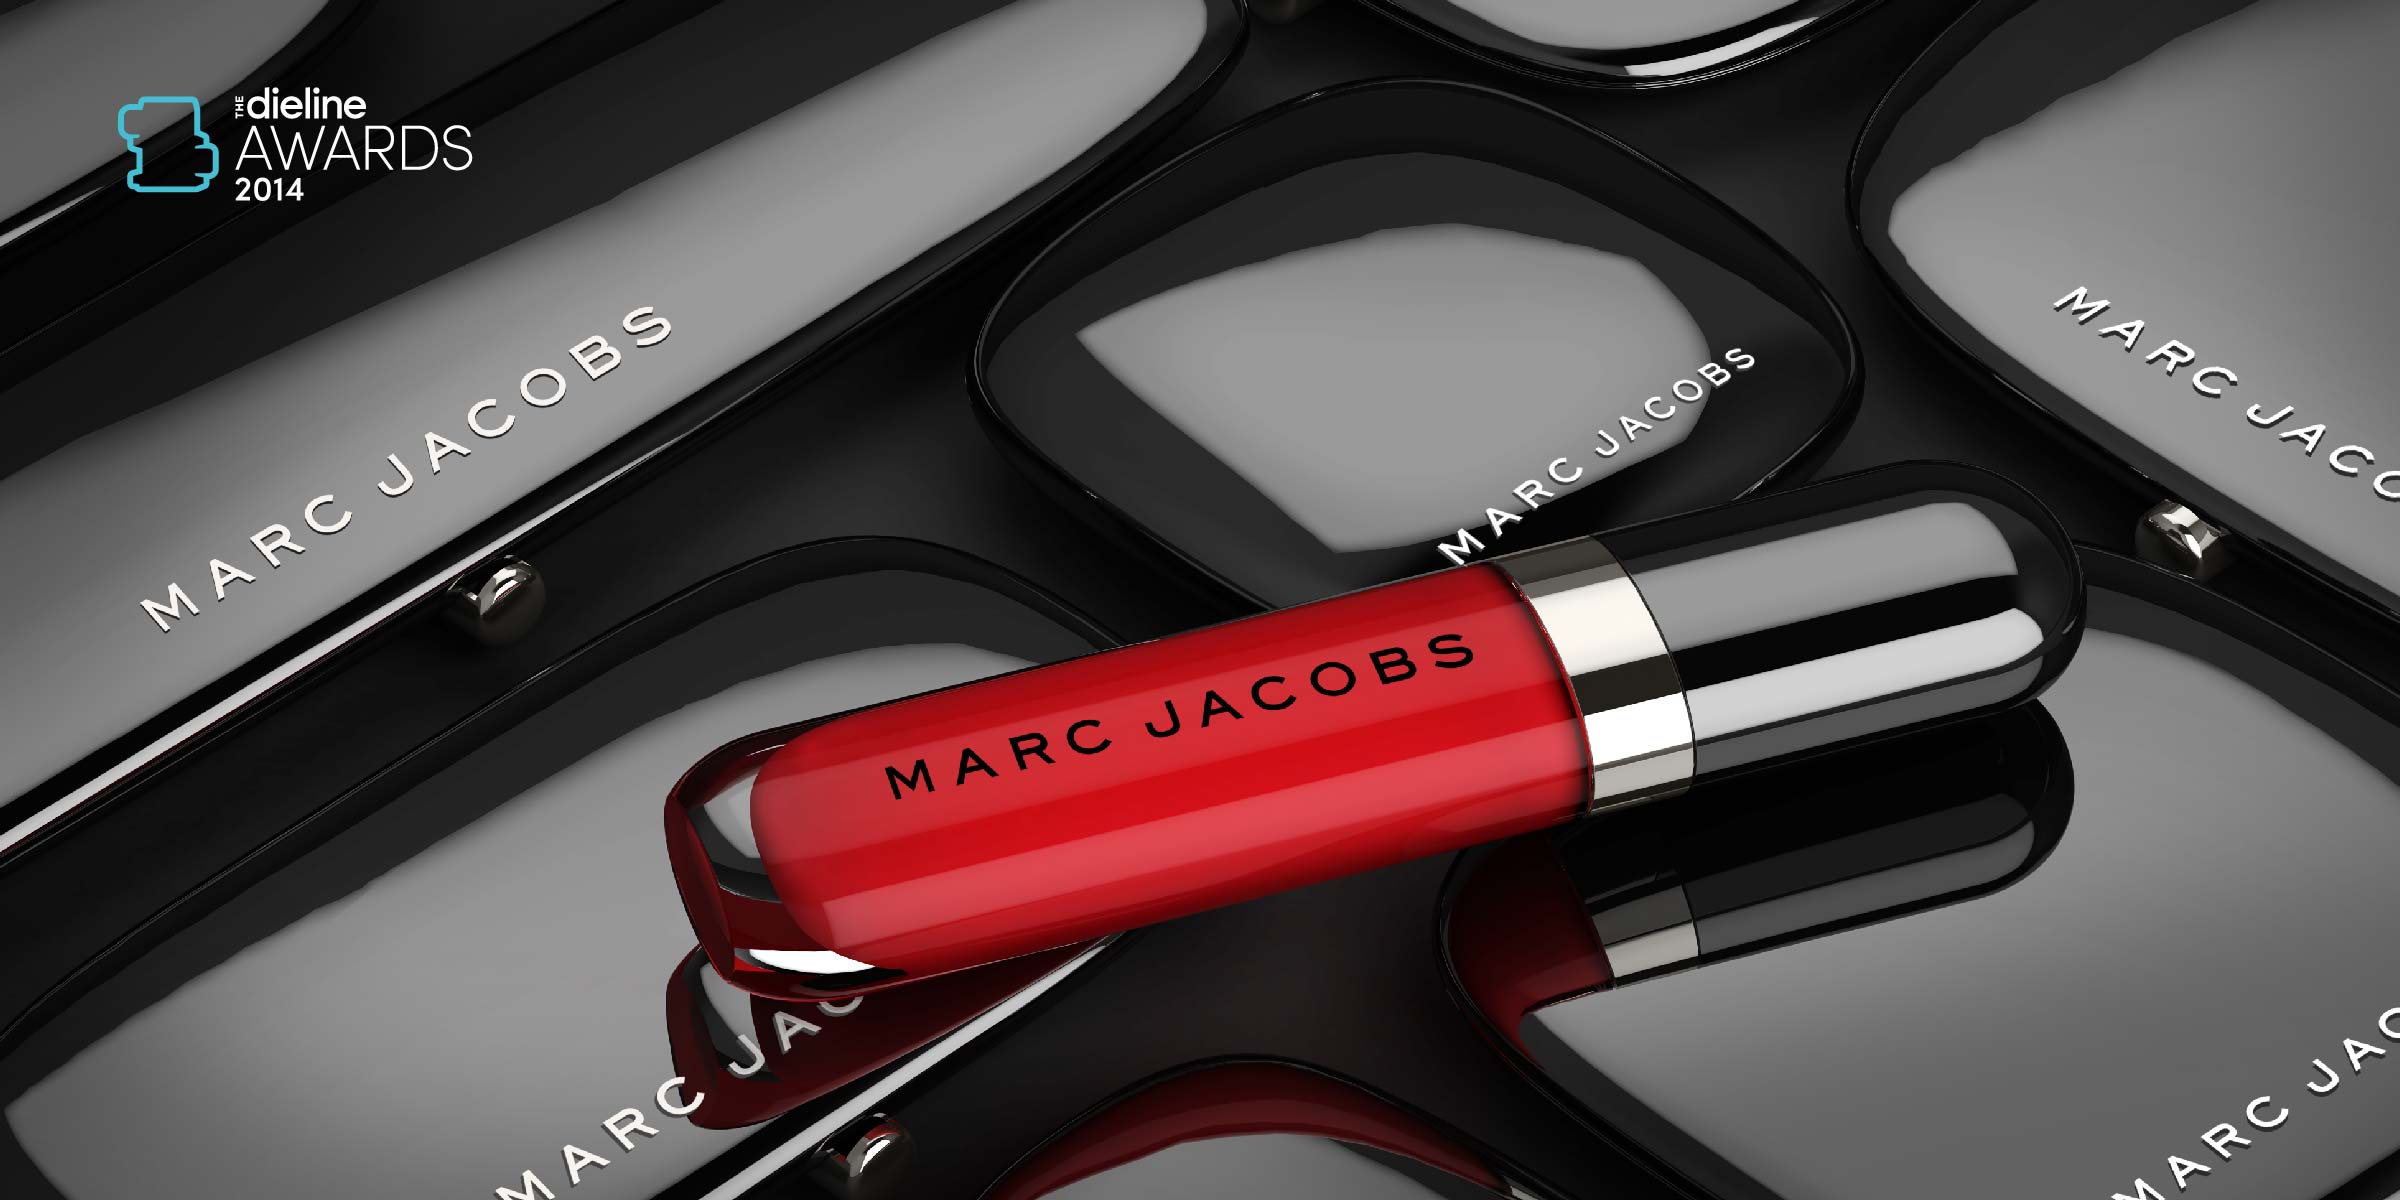 The Dieline Awards 2014: Editor’s Choice – Marc Jacobs Cosmetics